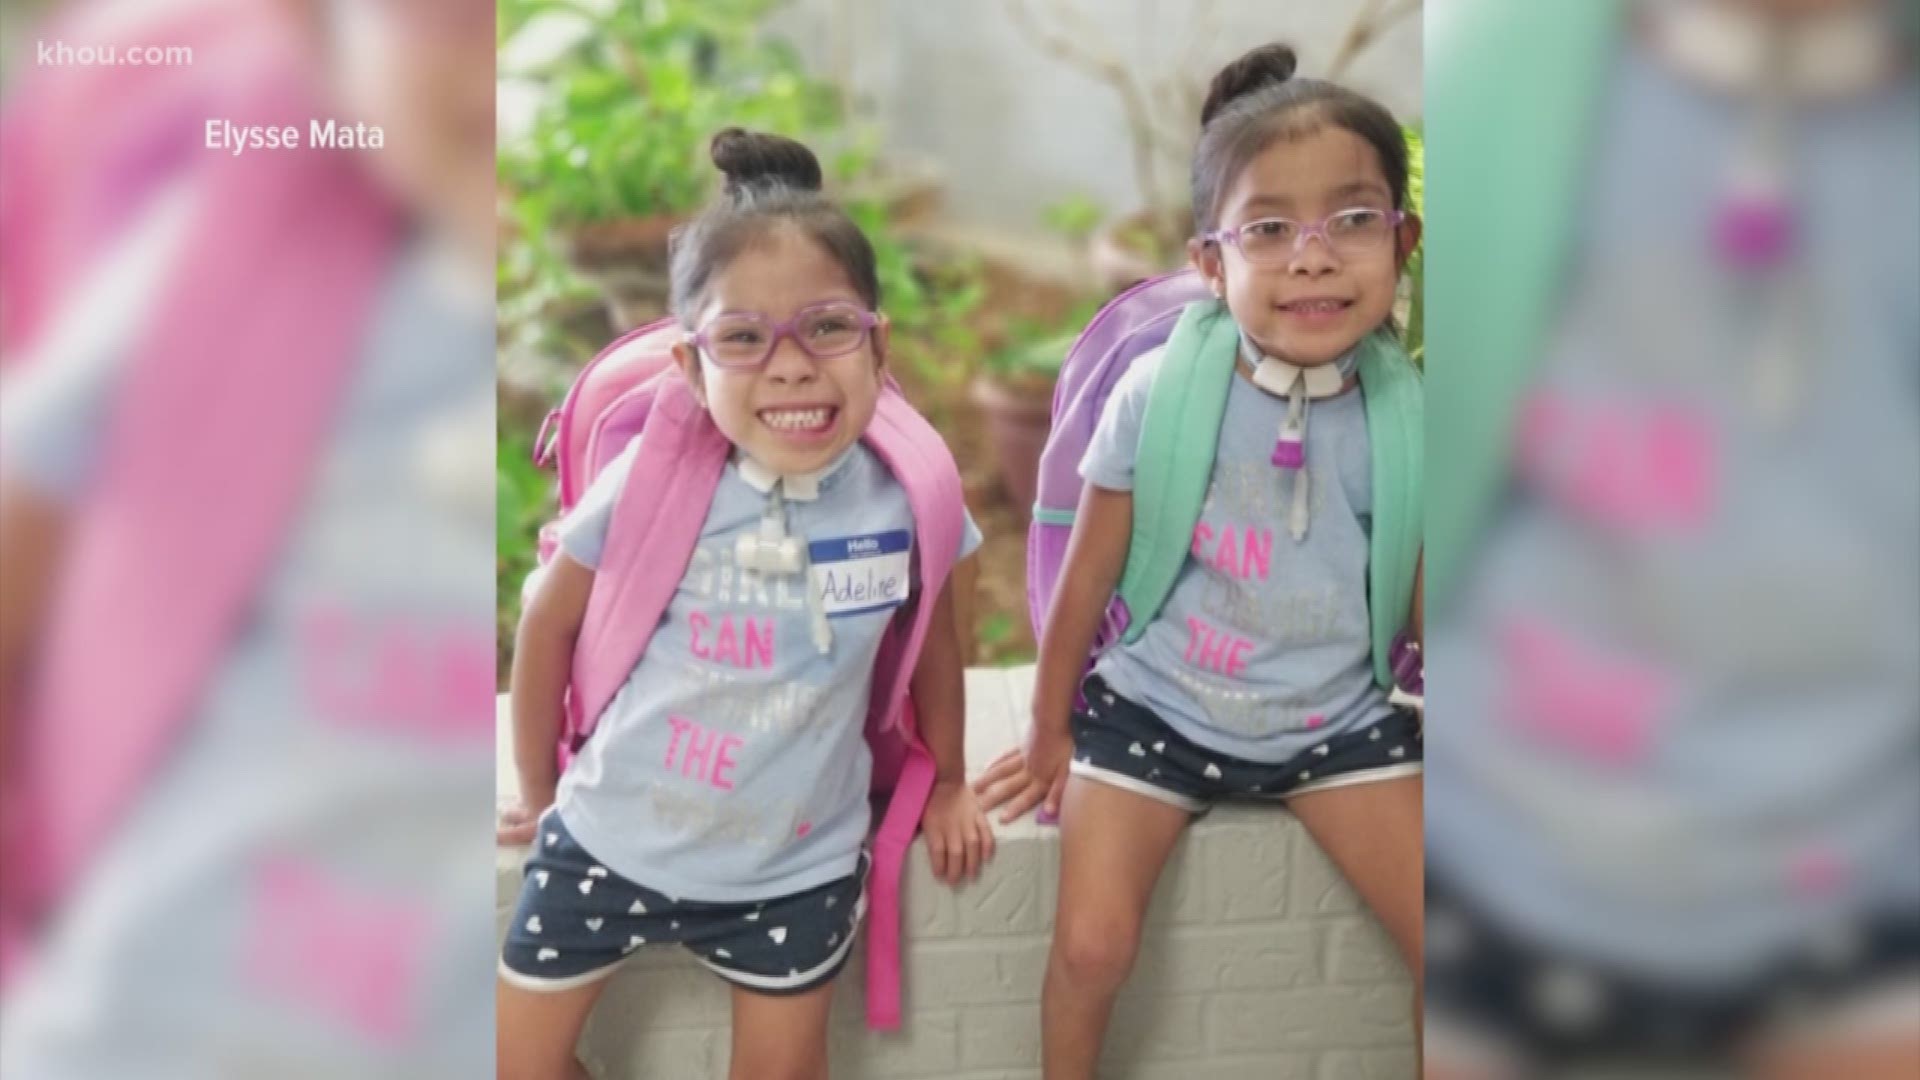 Knatalye Hope and Adeline Faith Mata, conjoined twin girls who were separated in 2015, started Pre-K this week.